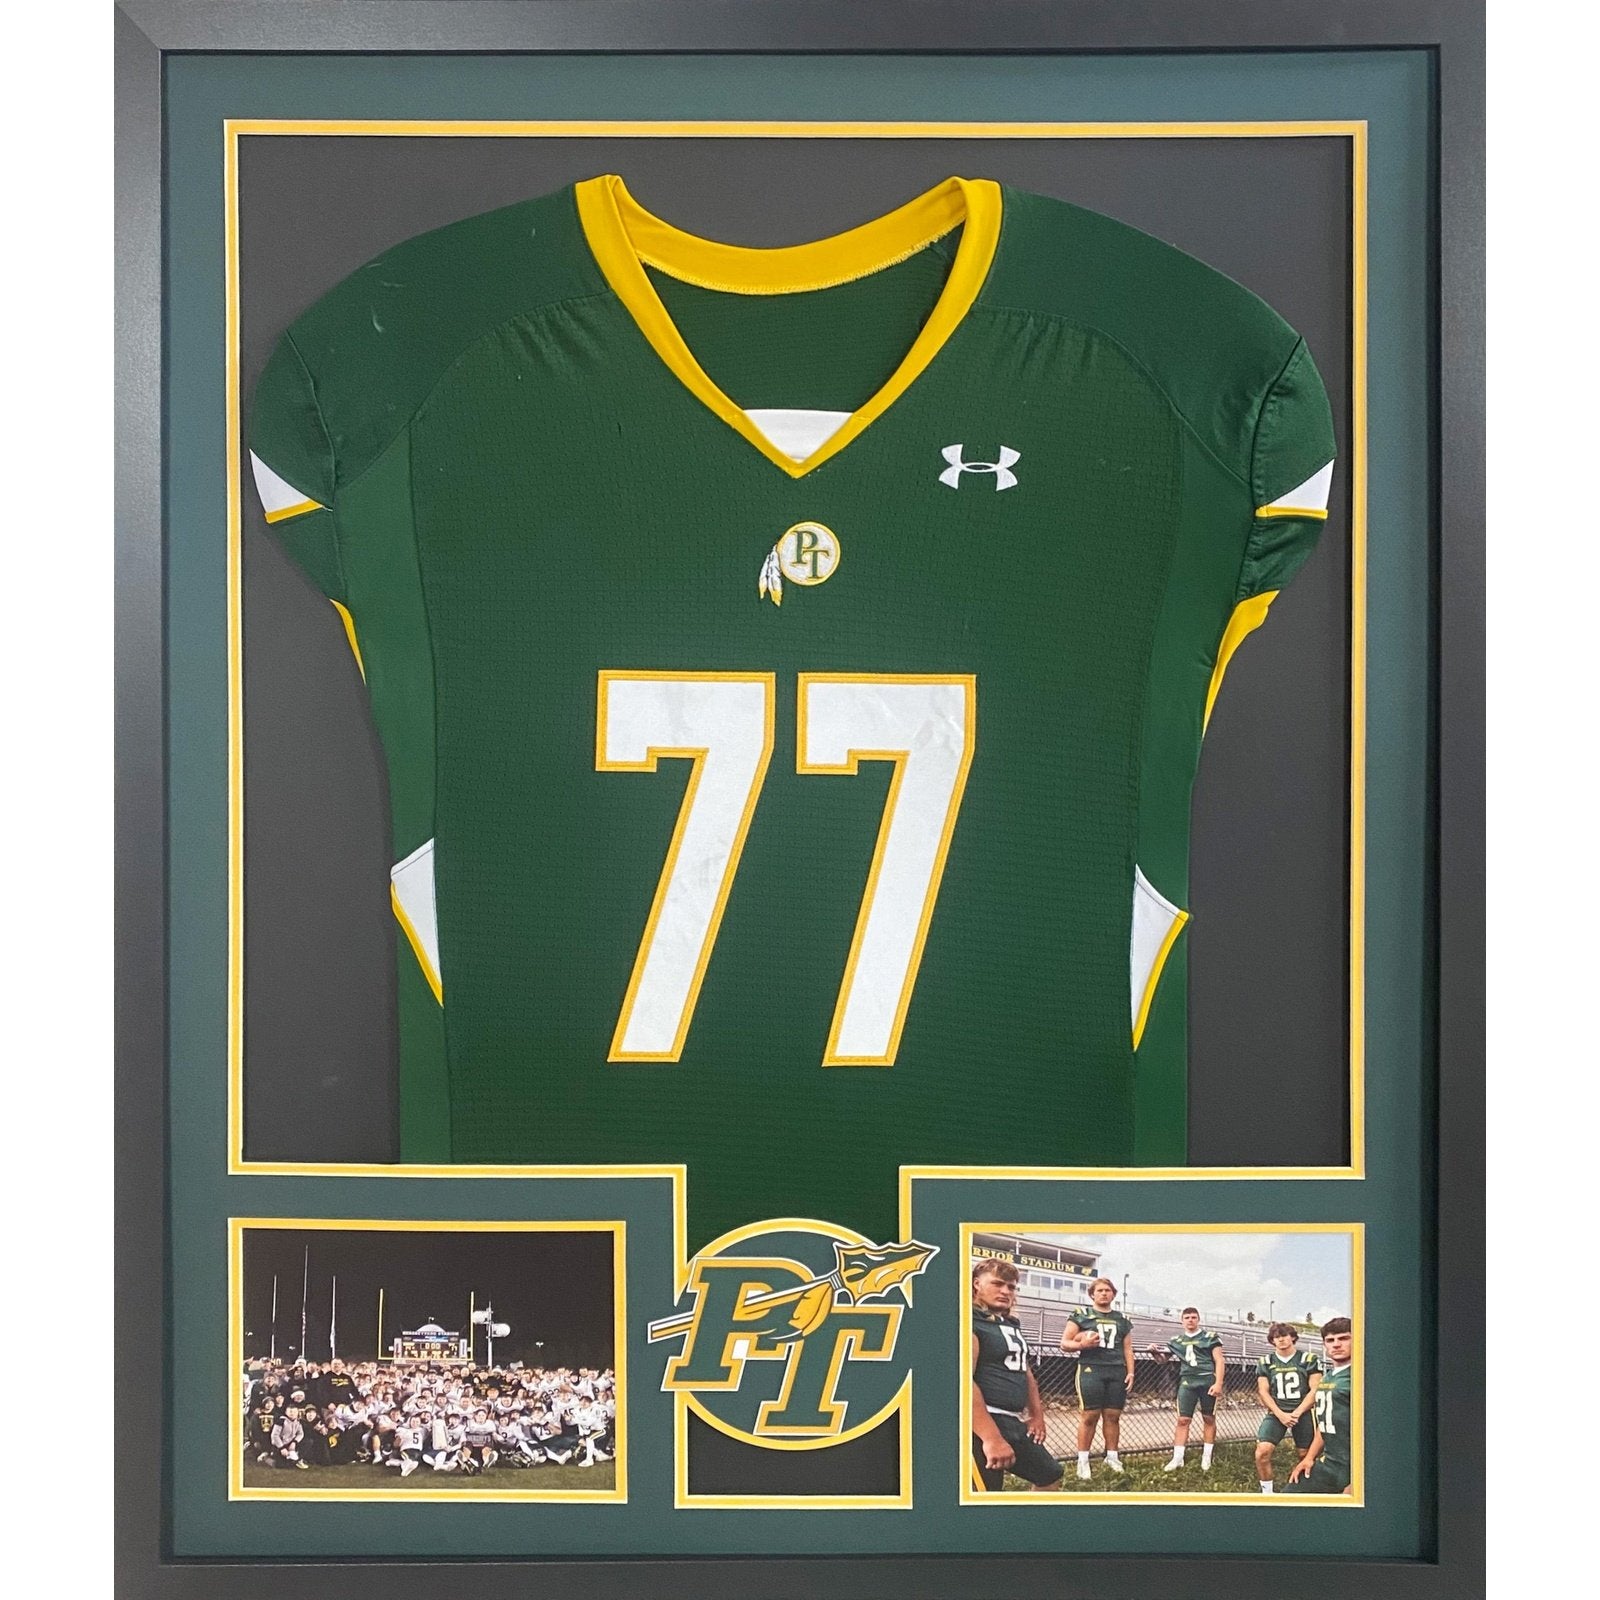 Penn Trafford Premier Large Framed Jersey with Dual Photo Displays_ 1